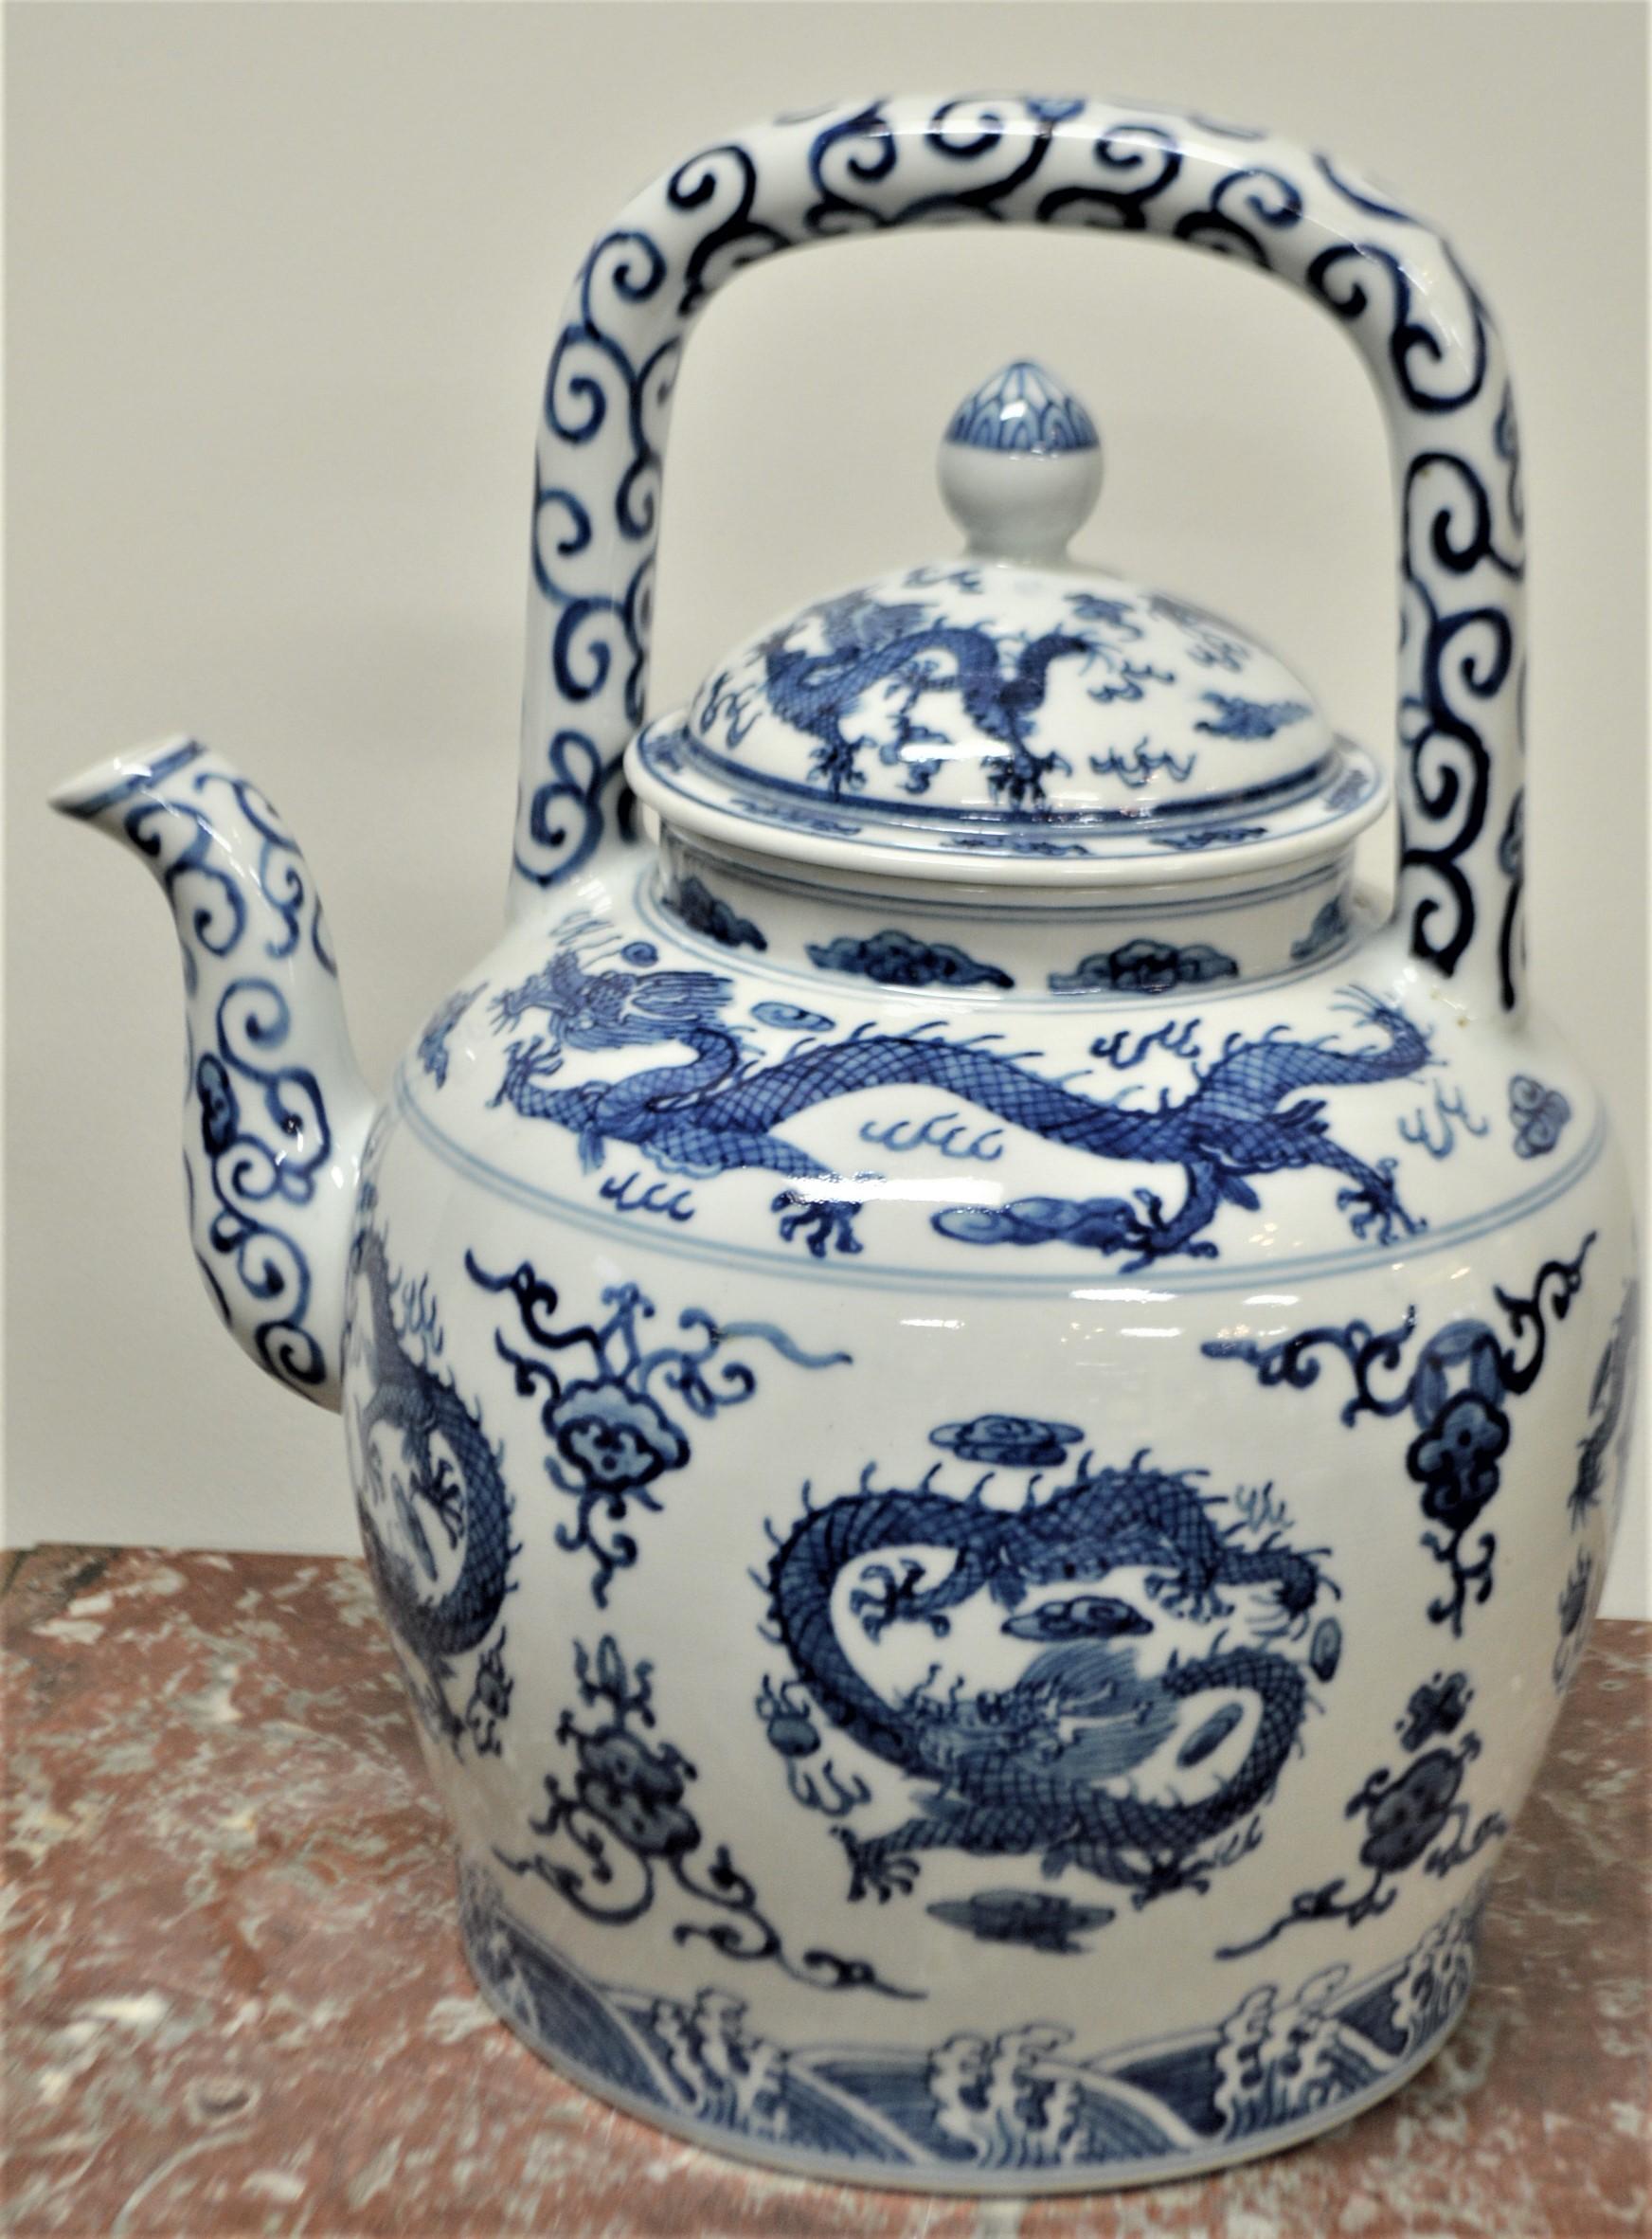 Highly decorative blue and white large porcelain Chinese tea pot. New condition.
Amusing dragon design painted on the porcelain. Chinese marking under, see photo.